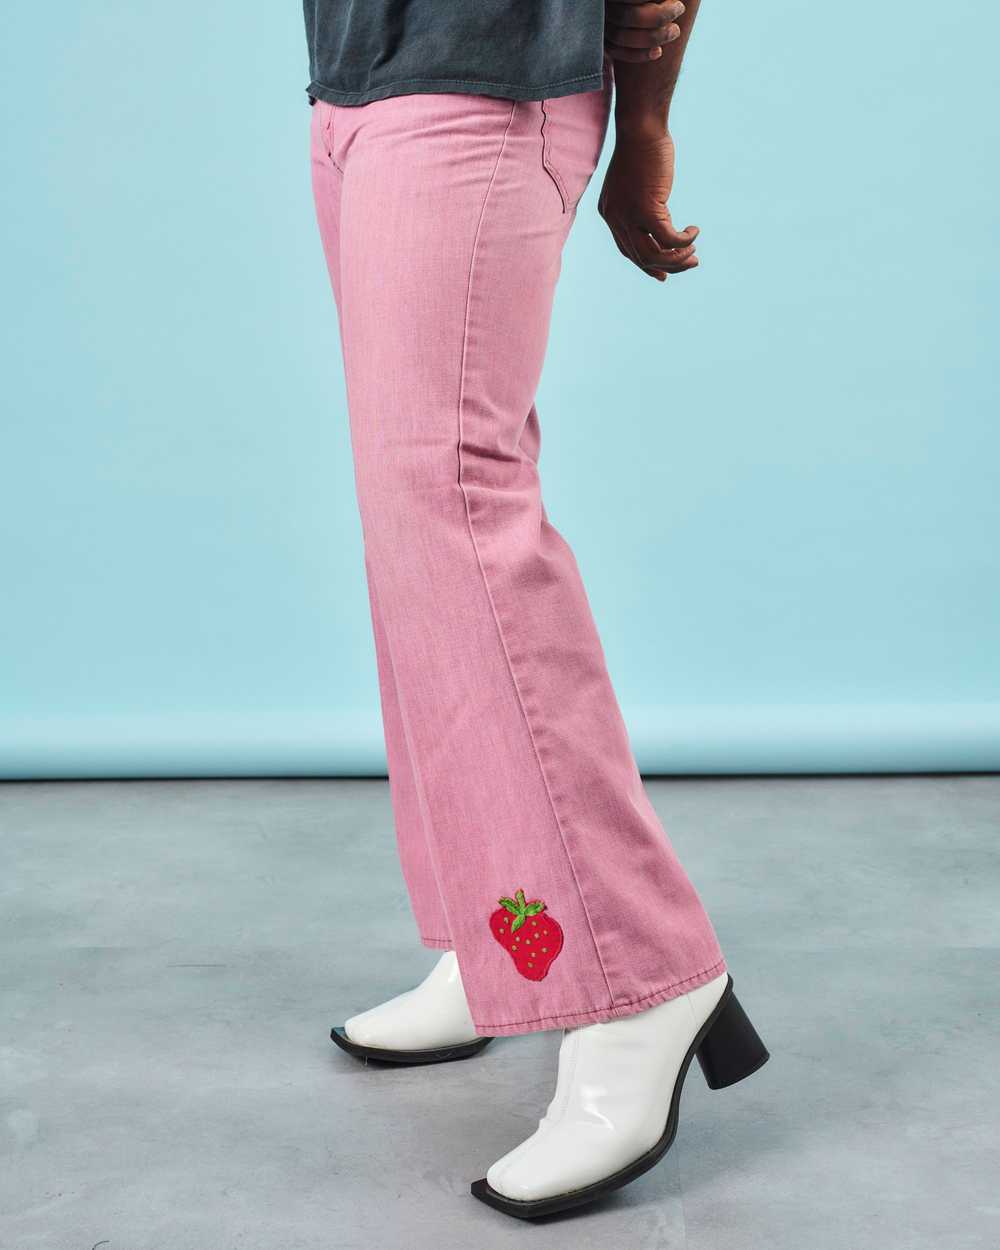 70's Levi's Patch Bell Bottoms - image 1